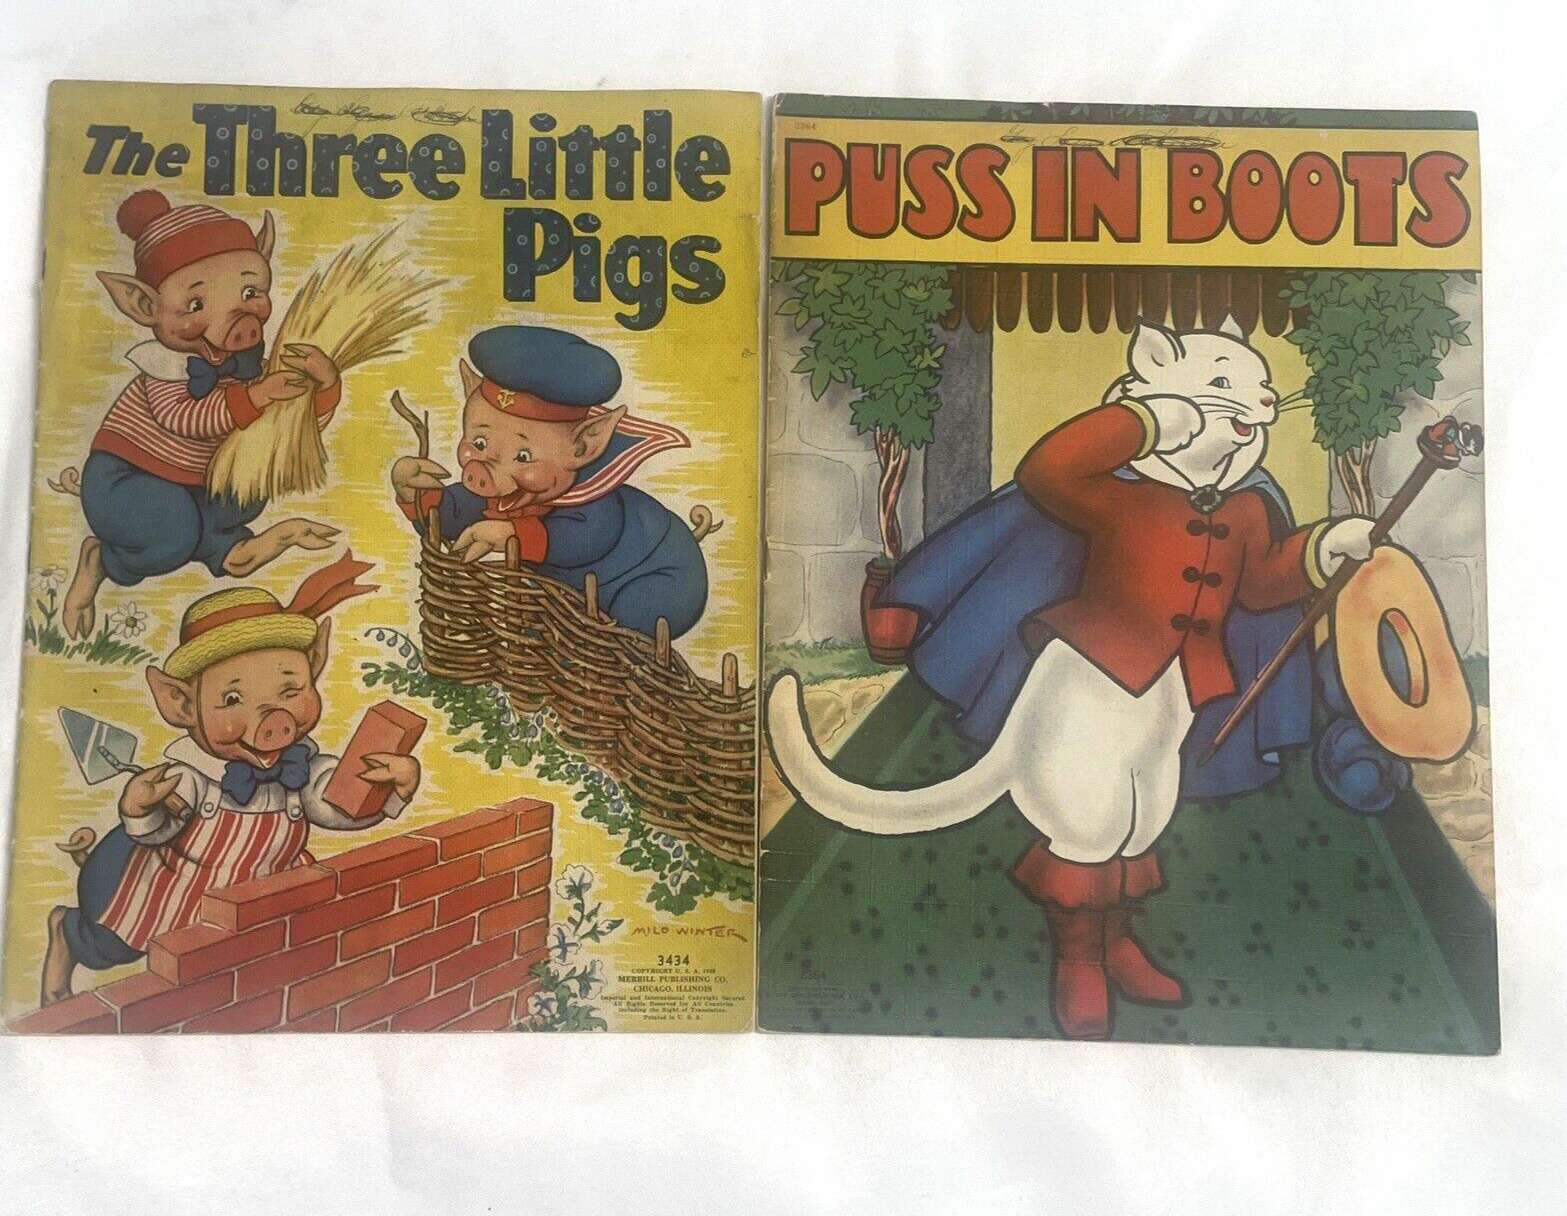 LOT OF 2 BOOKS THE THREE LITTLE PIGS 1939 AND PUSS IN BOOTS 1941 CHILDREN'S BOOK